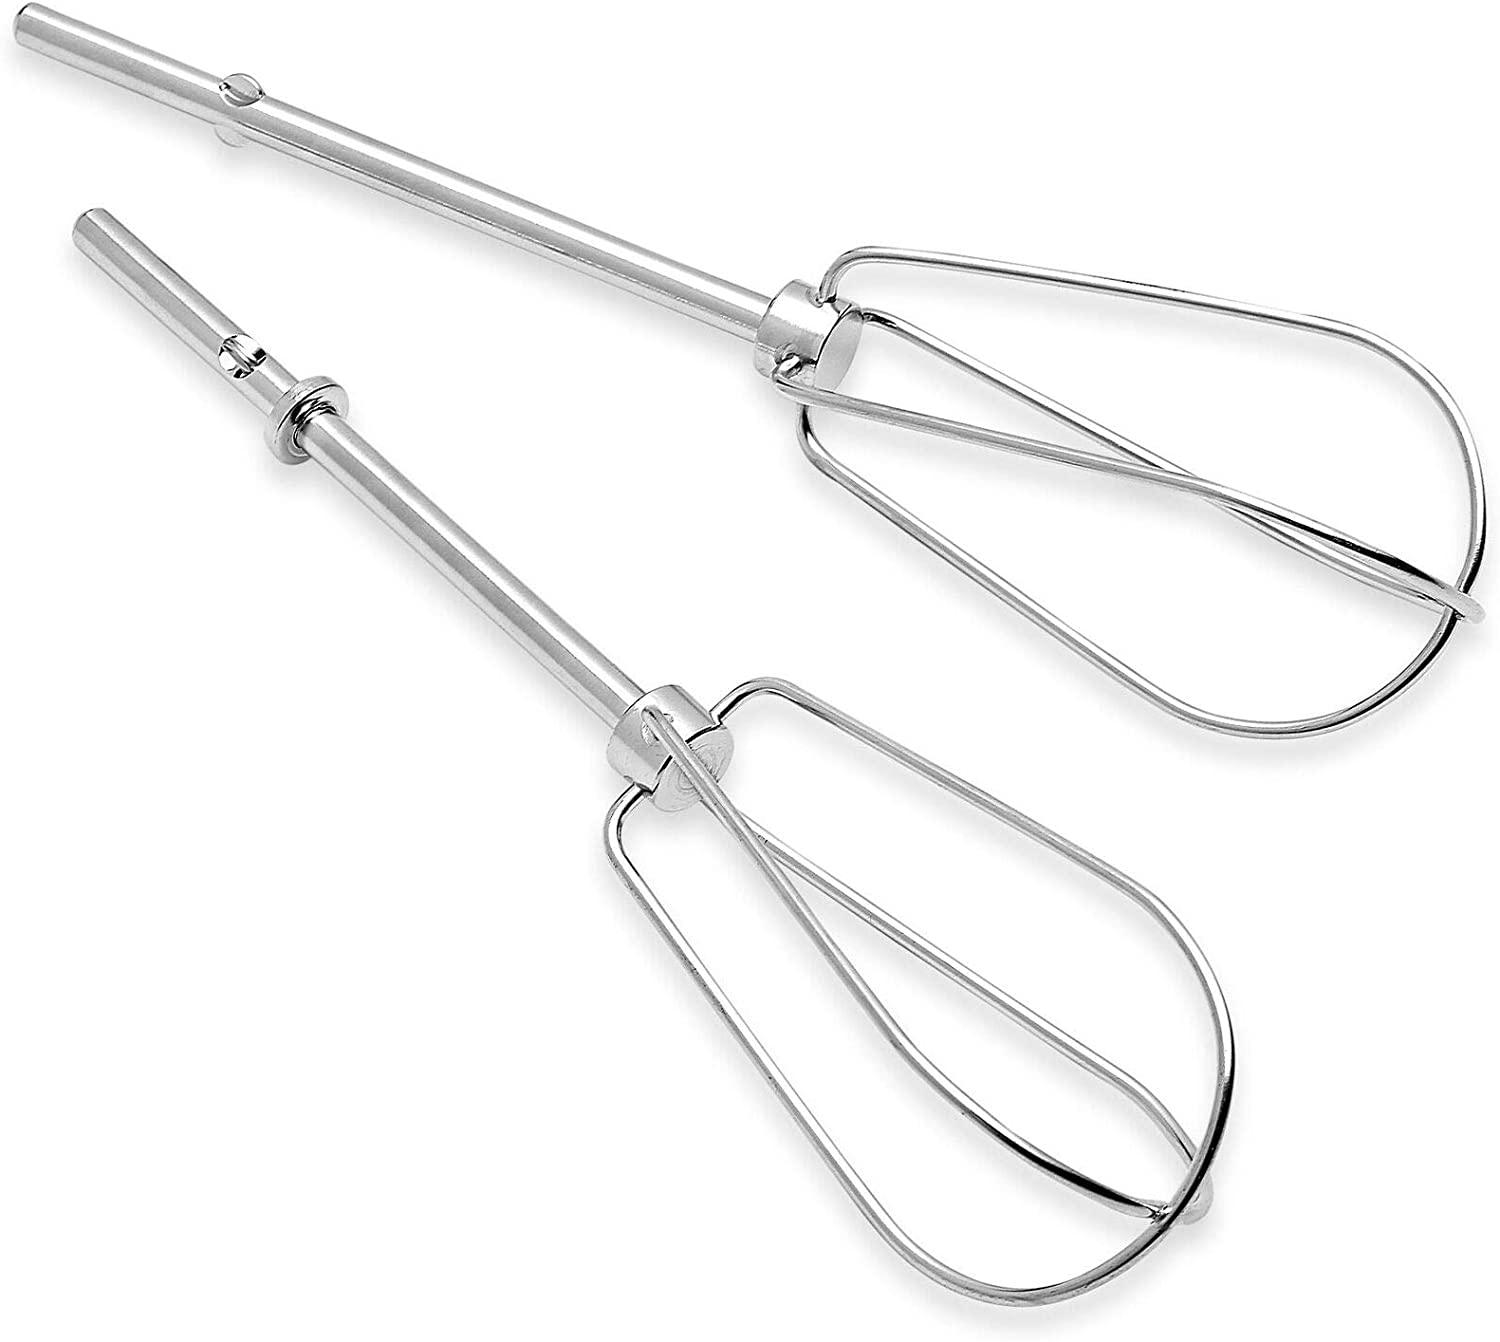 Antoble Exact Fit Hand Mixer Replacement Beaters, 2-Count